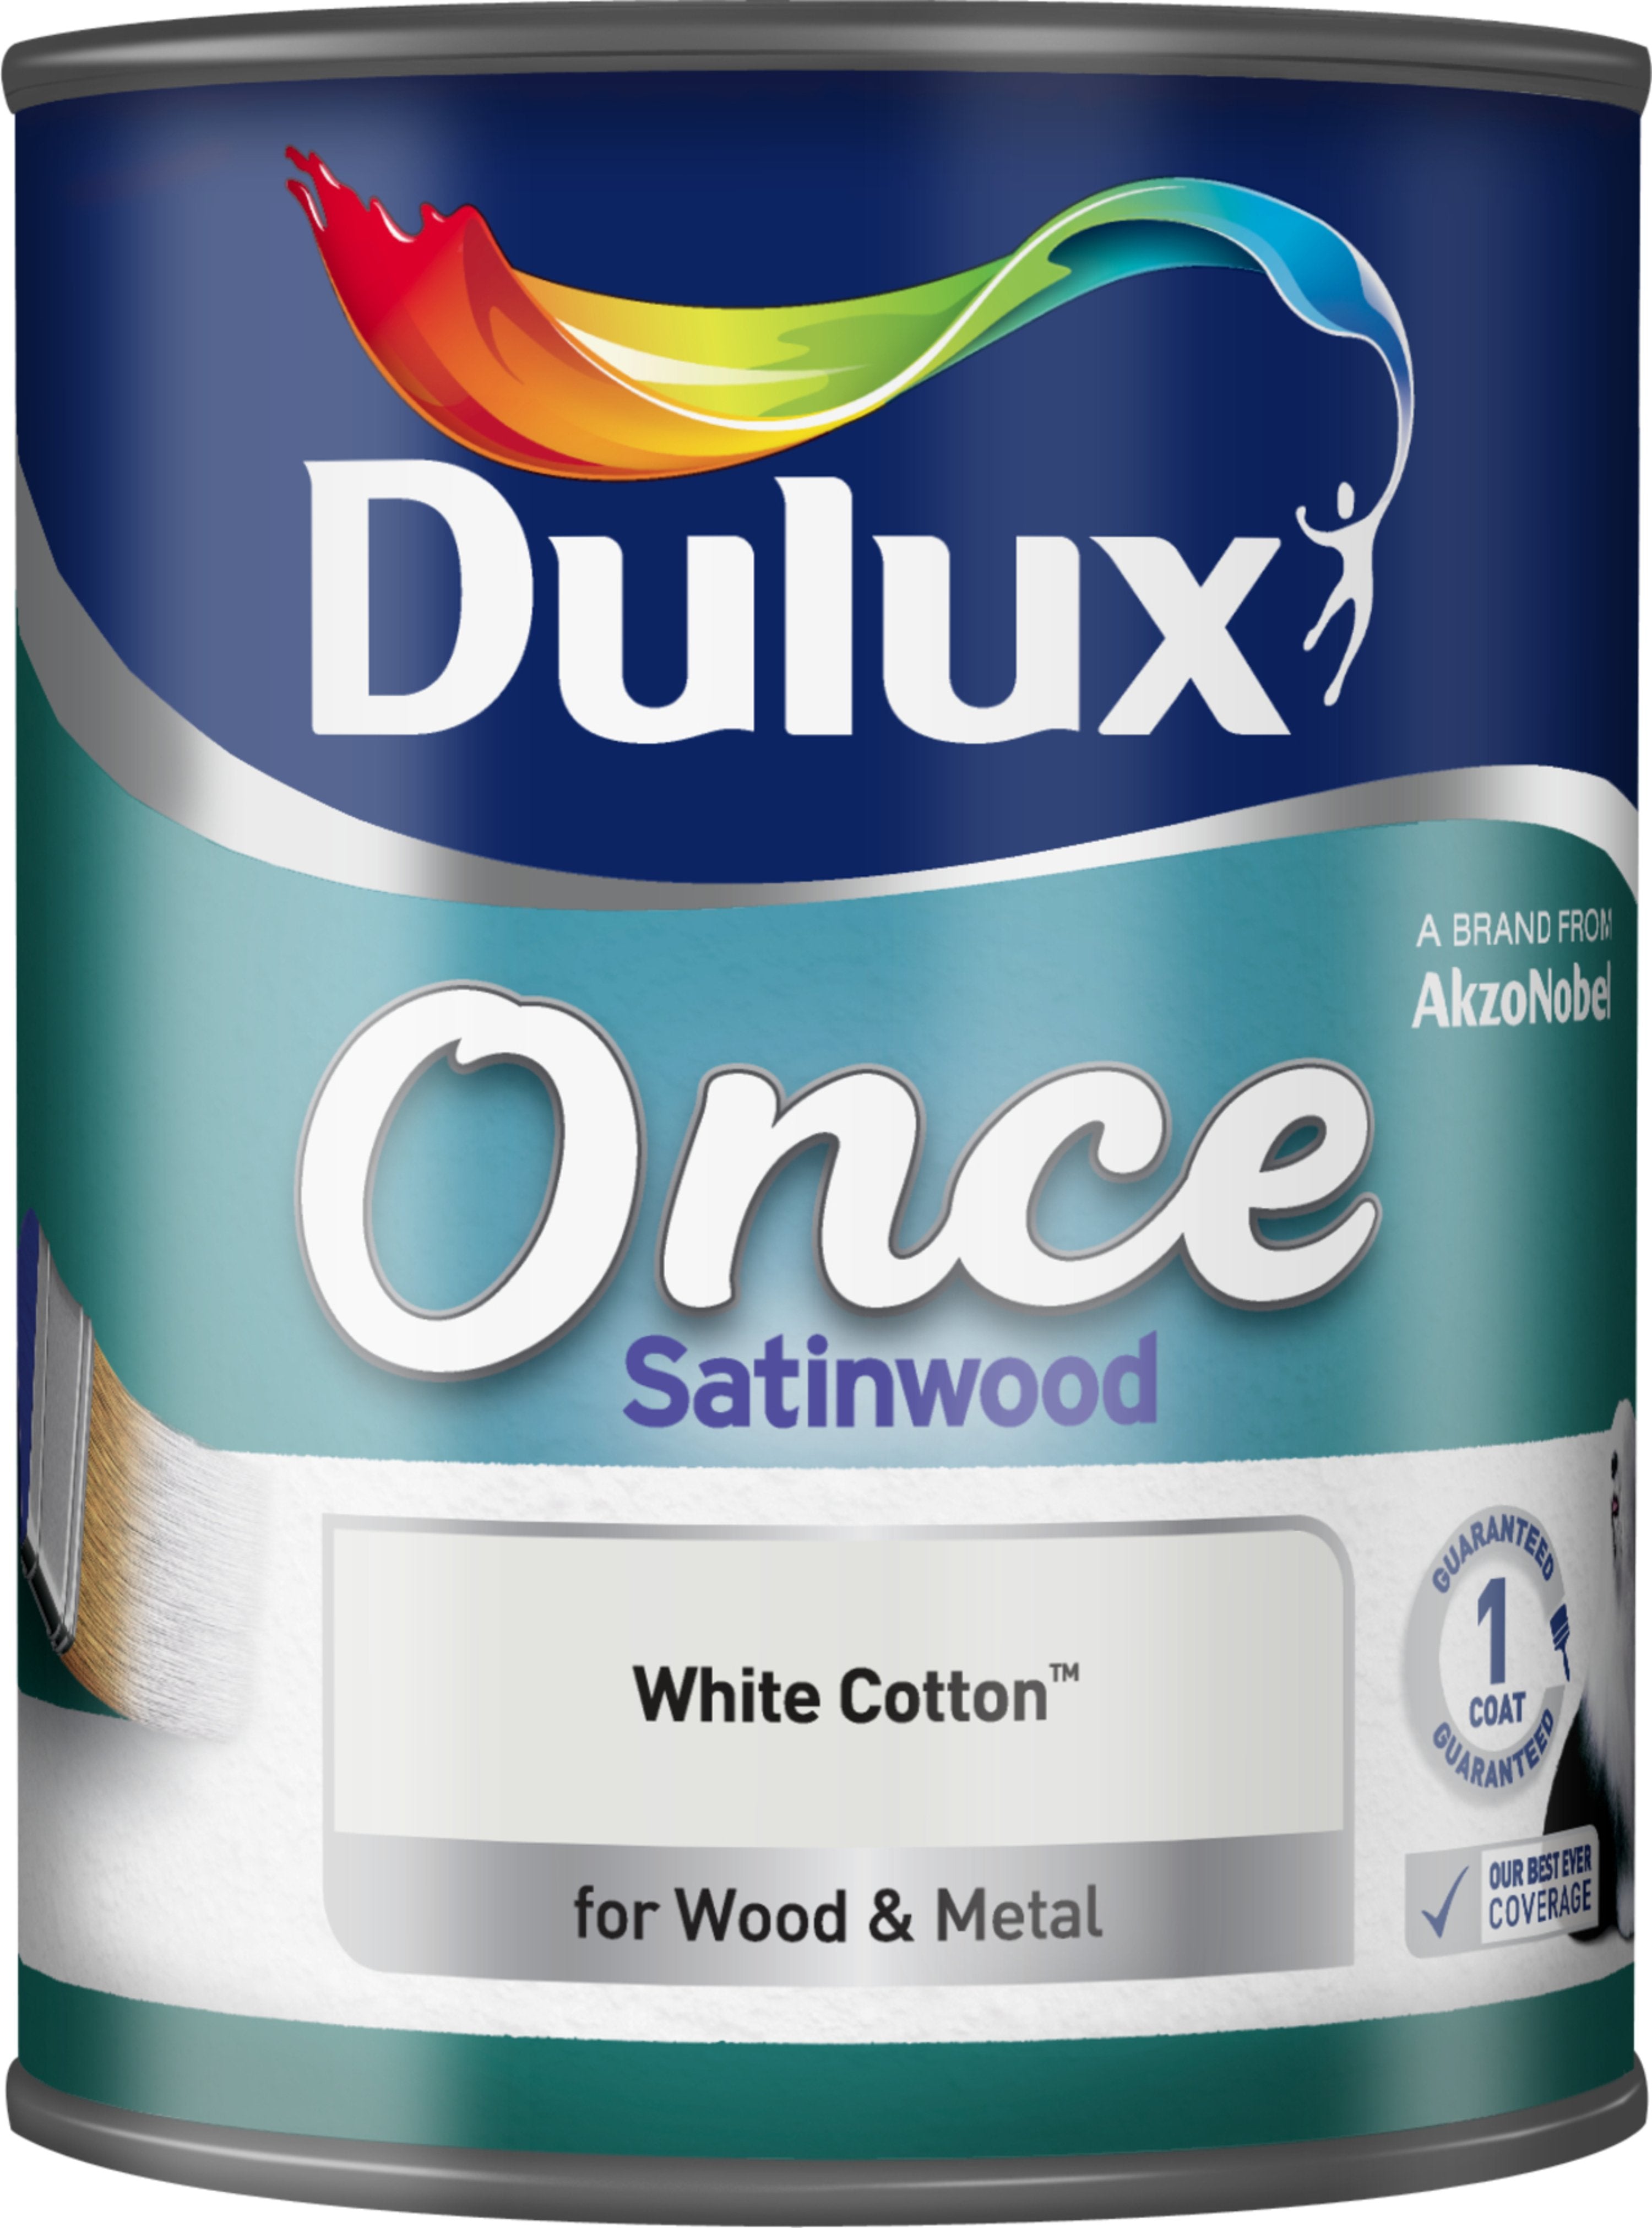 Dulux-Once-Satinwood-Paint-For-Wood-And-Metal-White-Cotton-750ml